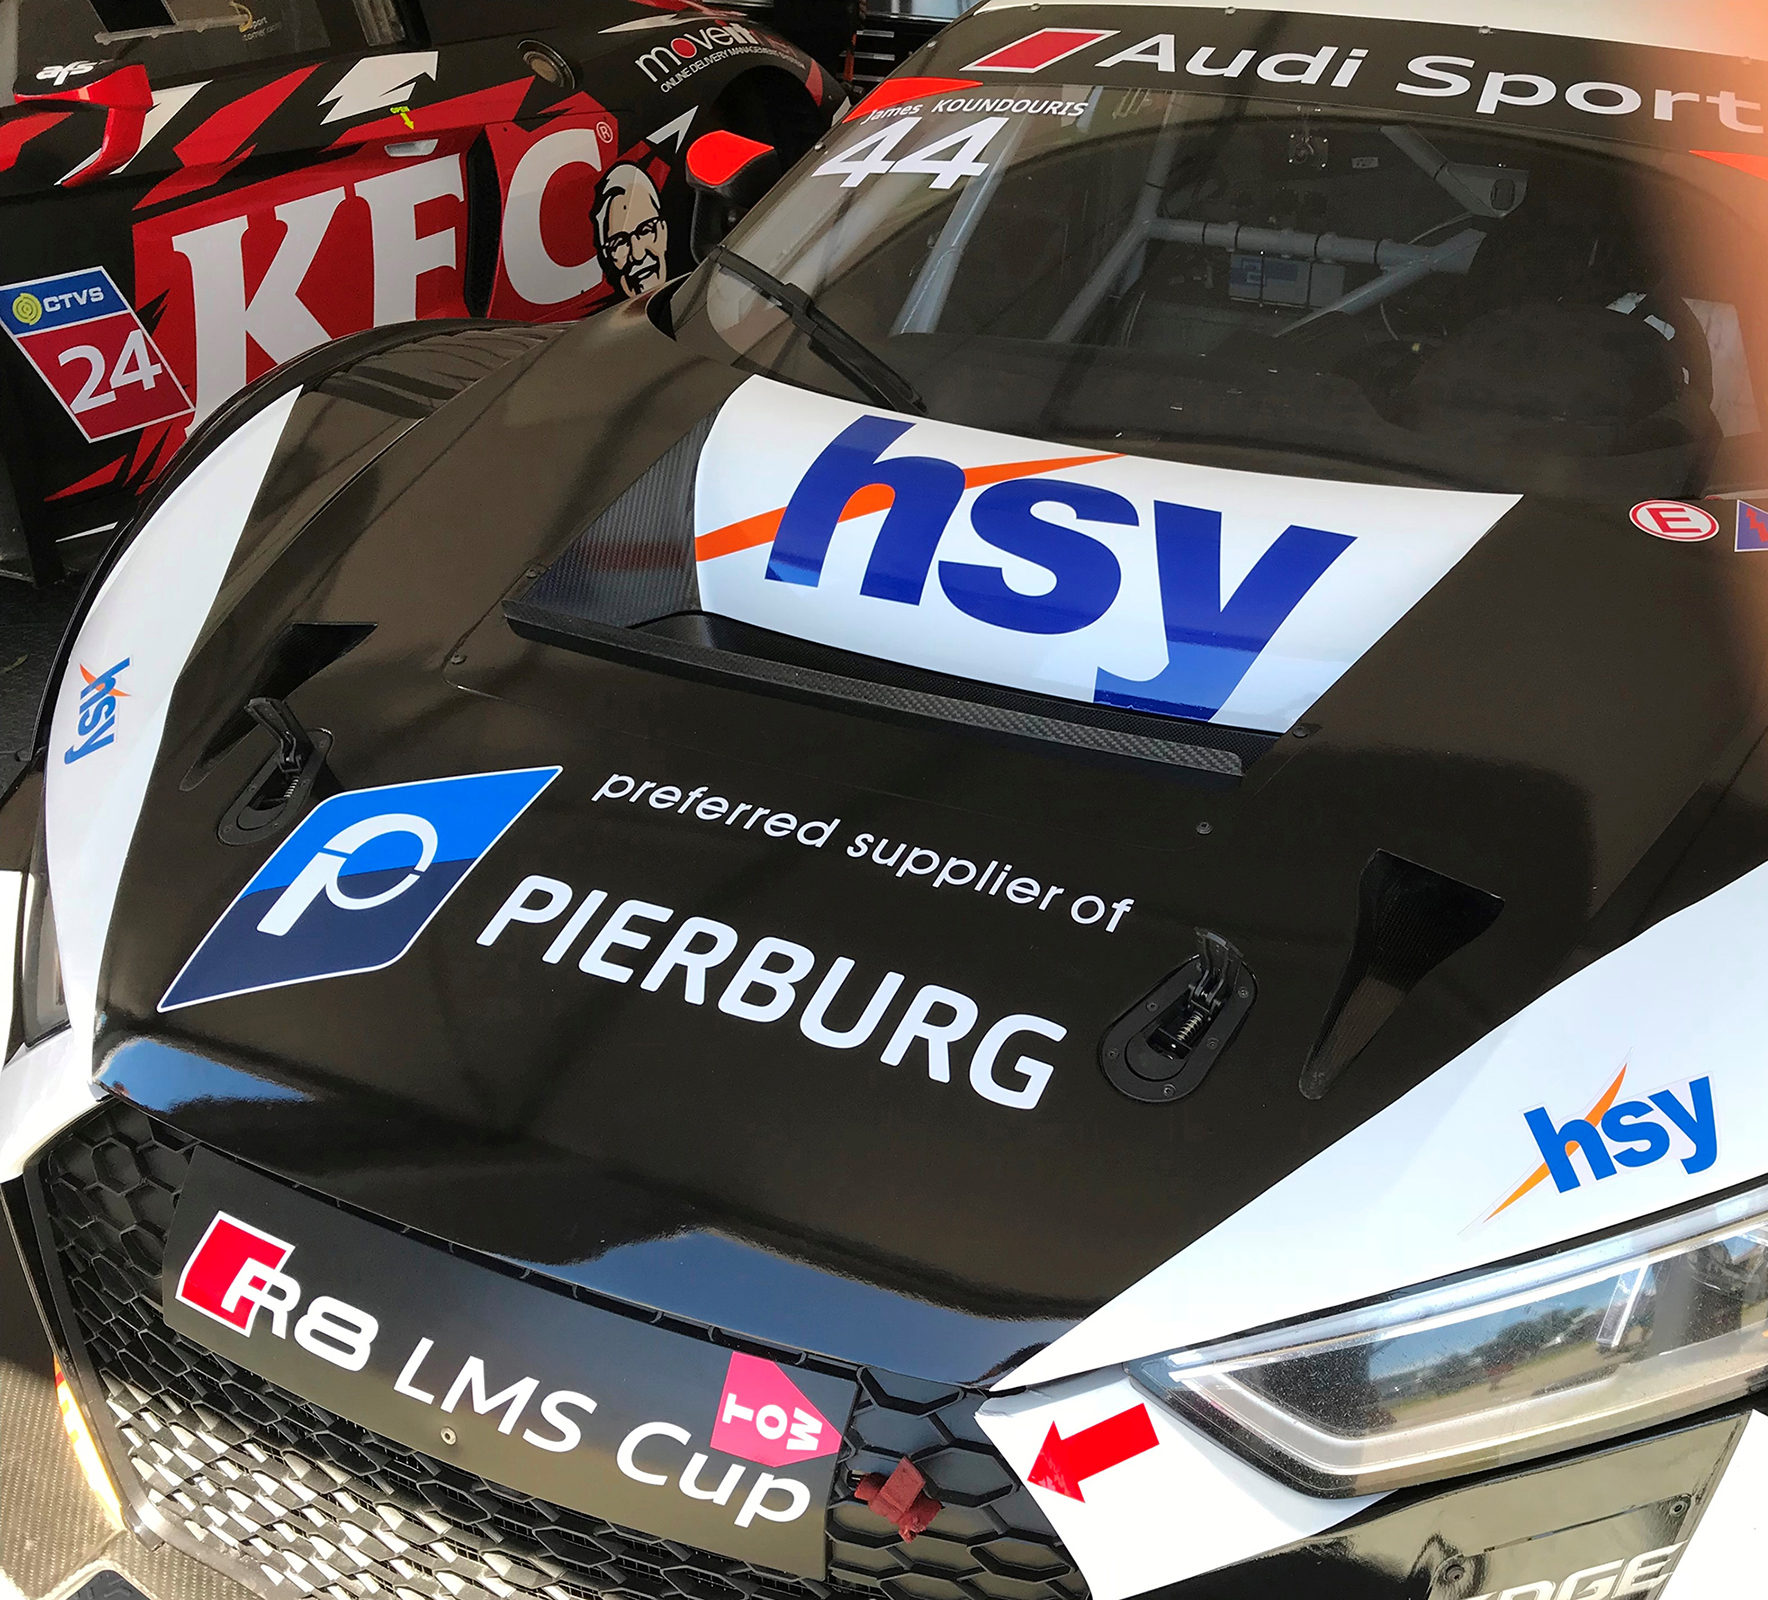 hsy Racing set to tackle round 1 of the Audi R8 LMS Cup in Adelaide